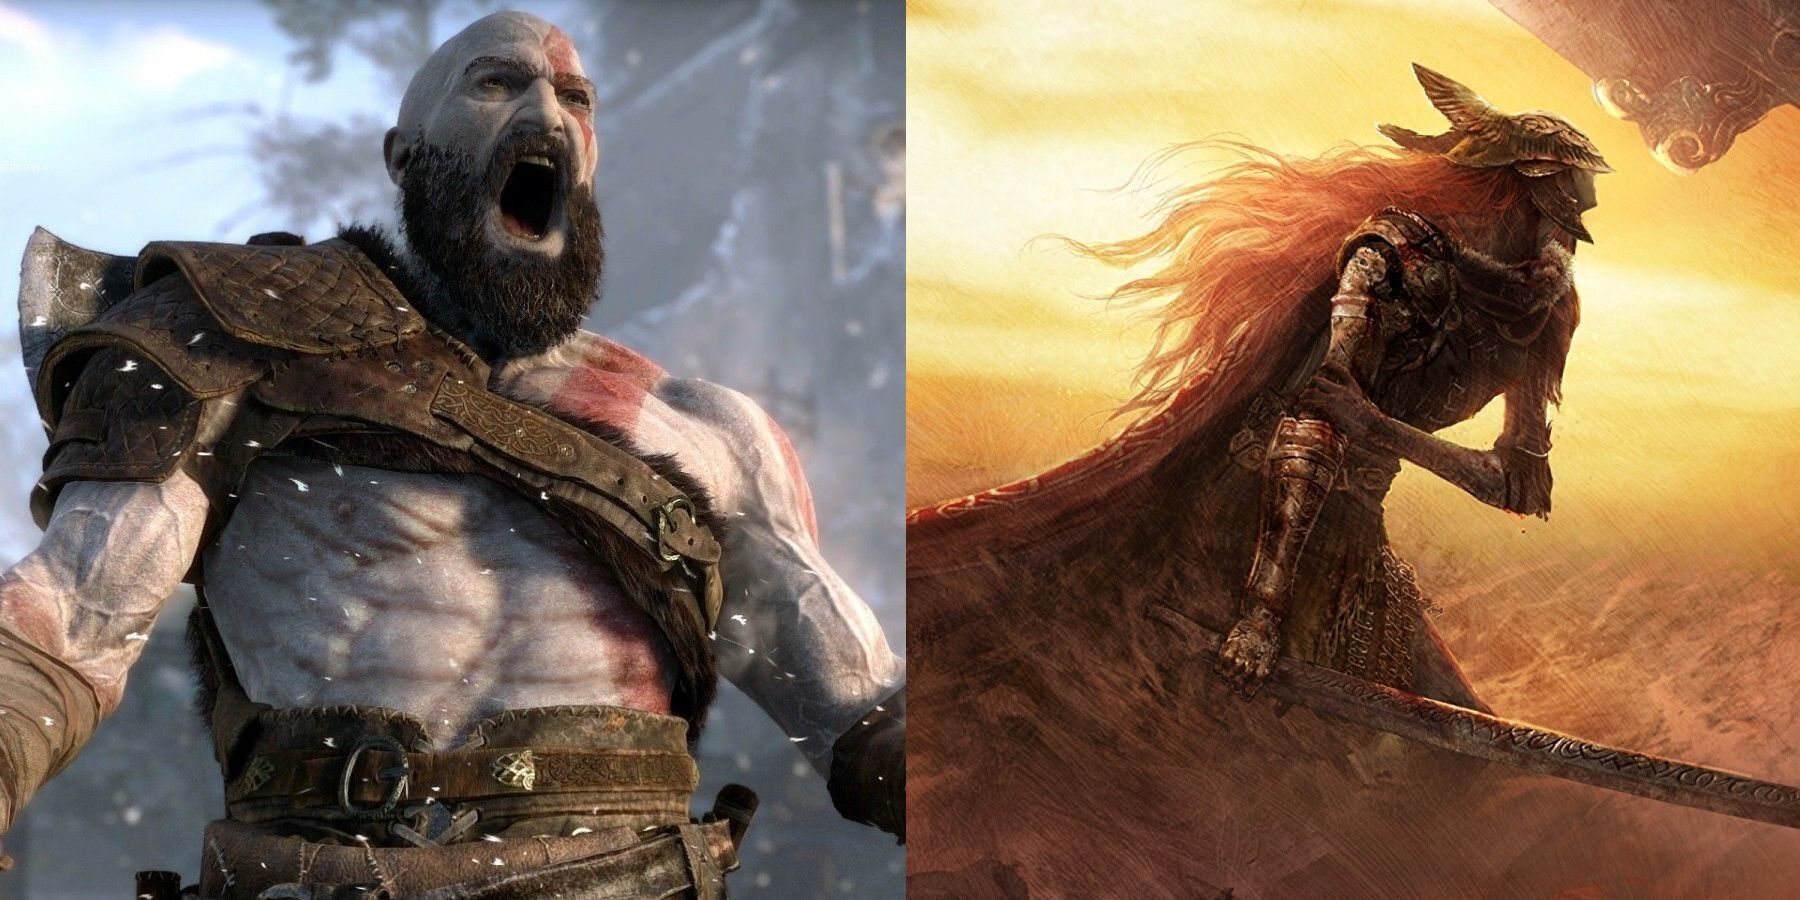 kratos from god of war and malenia from elden ring fight